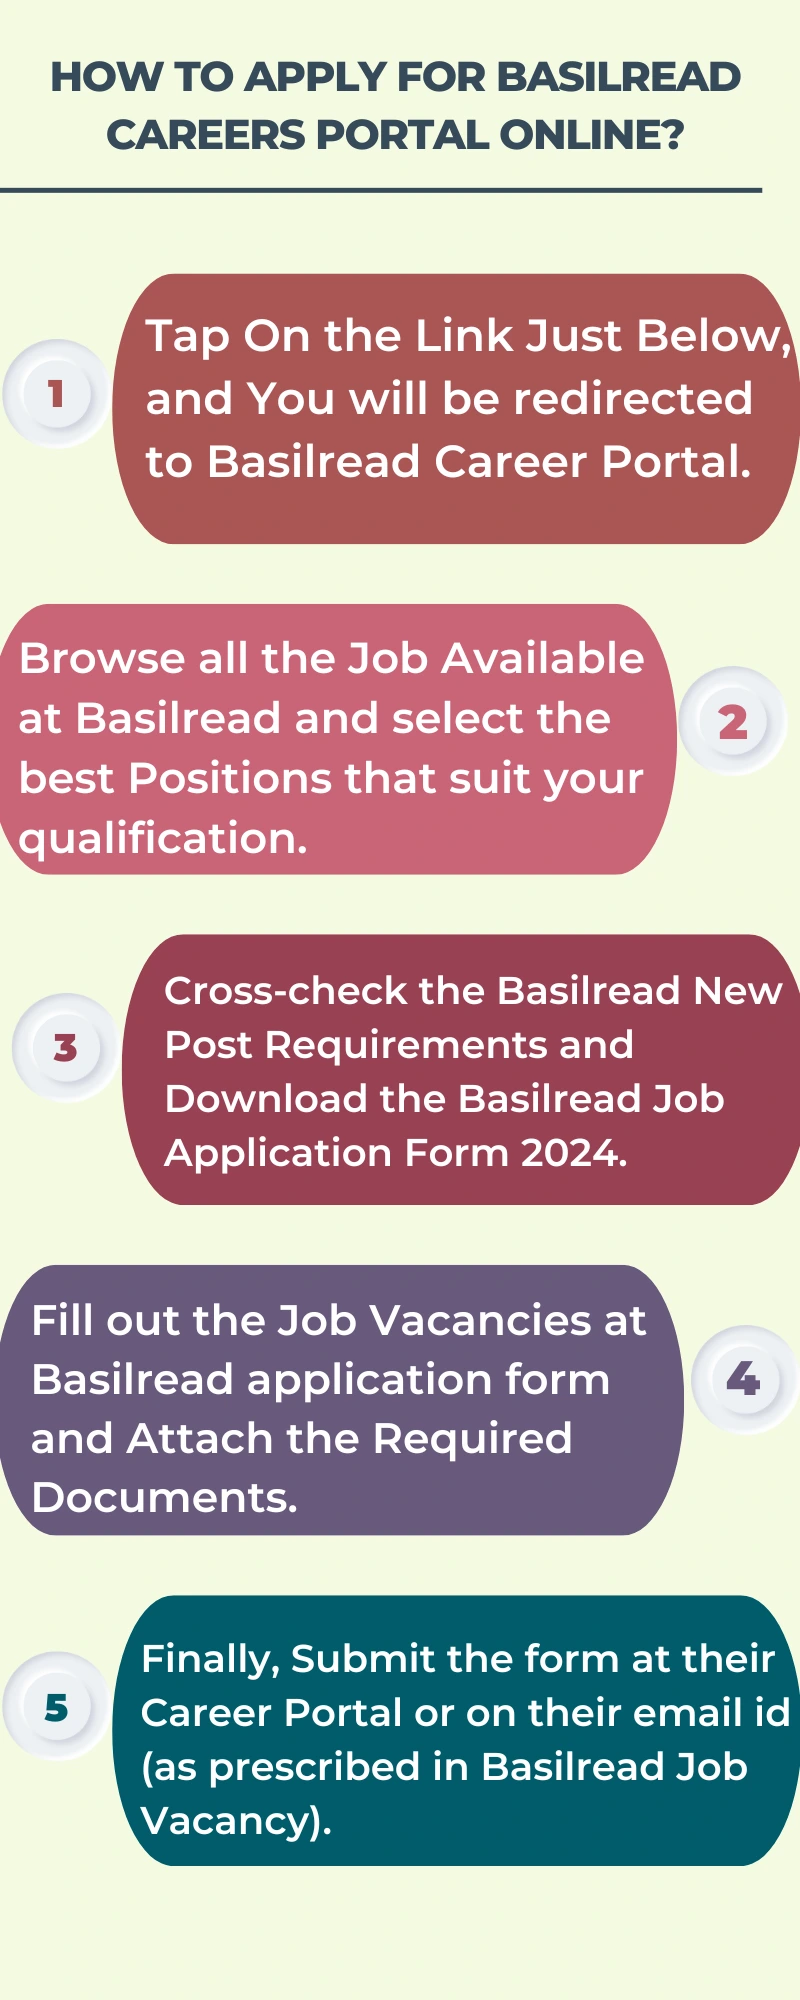 How To Apply for Basilread Careers Portal Online?